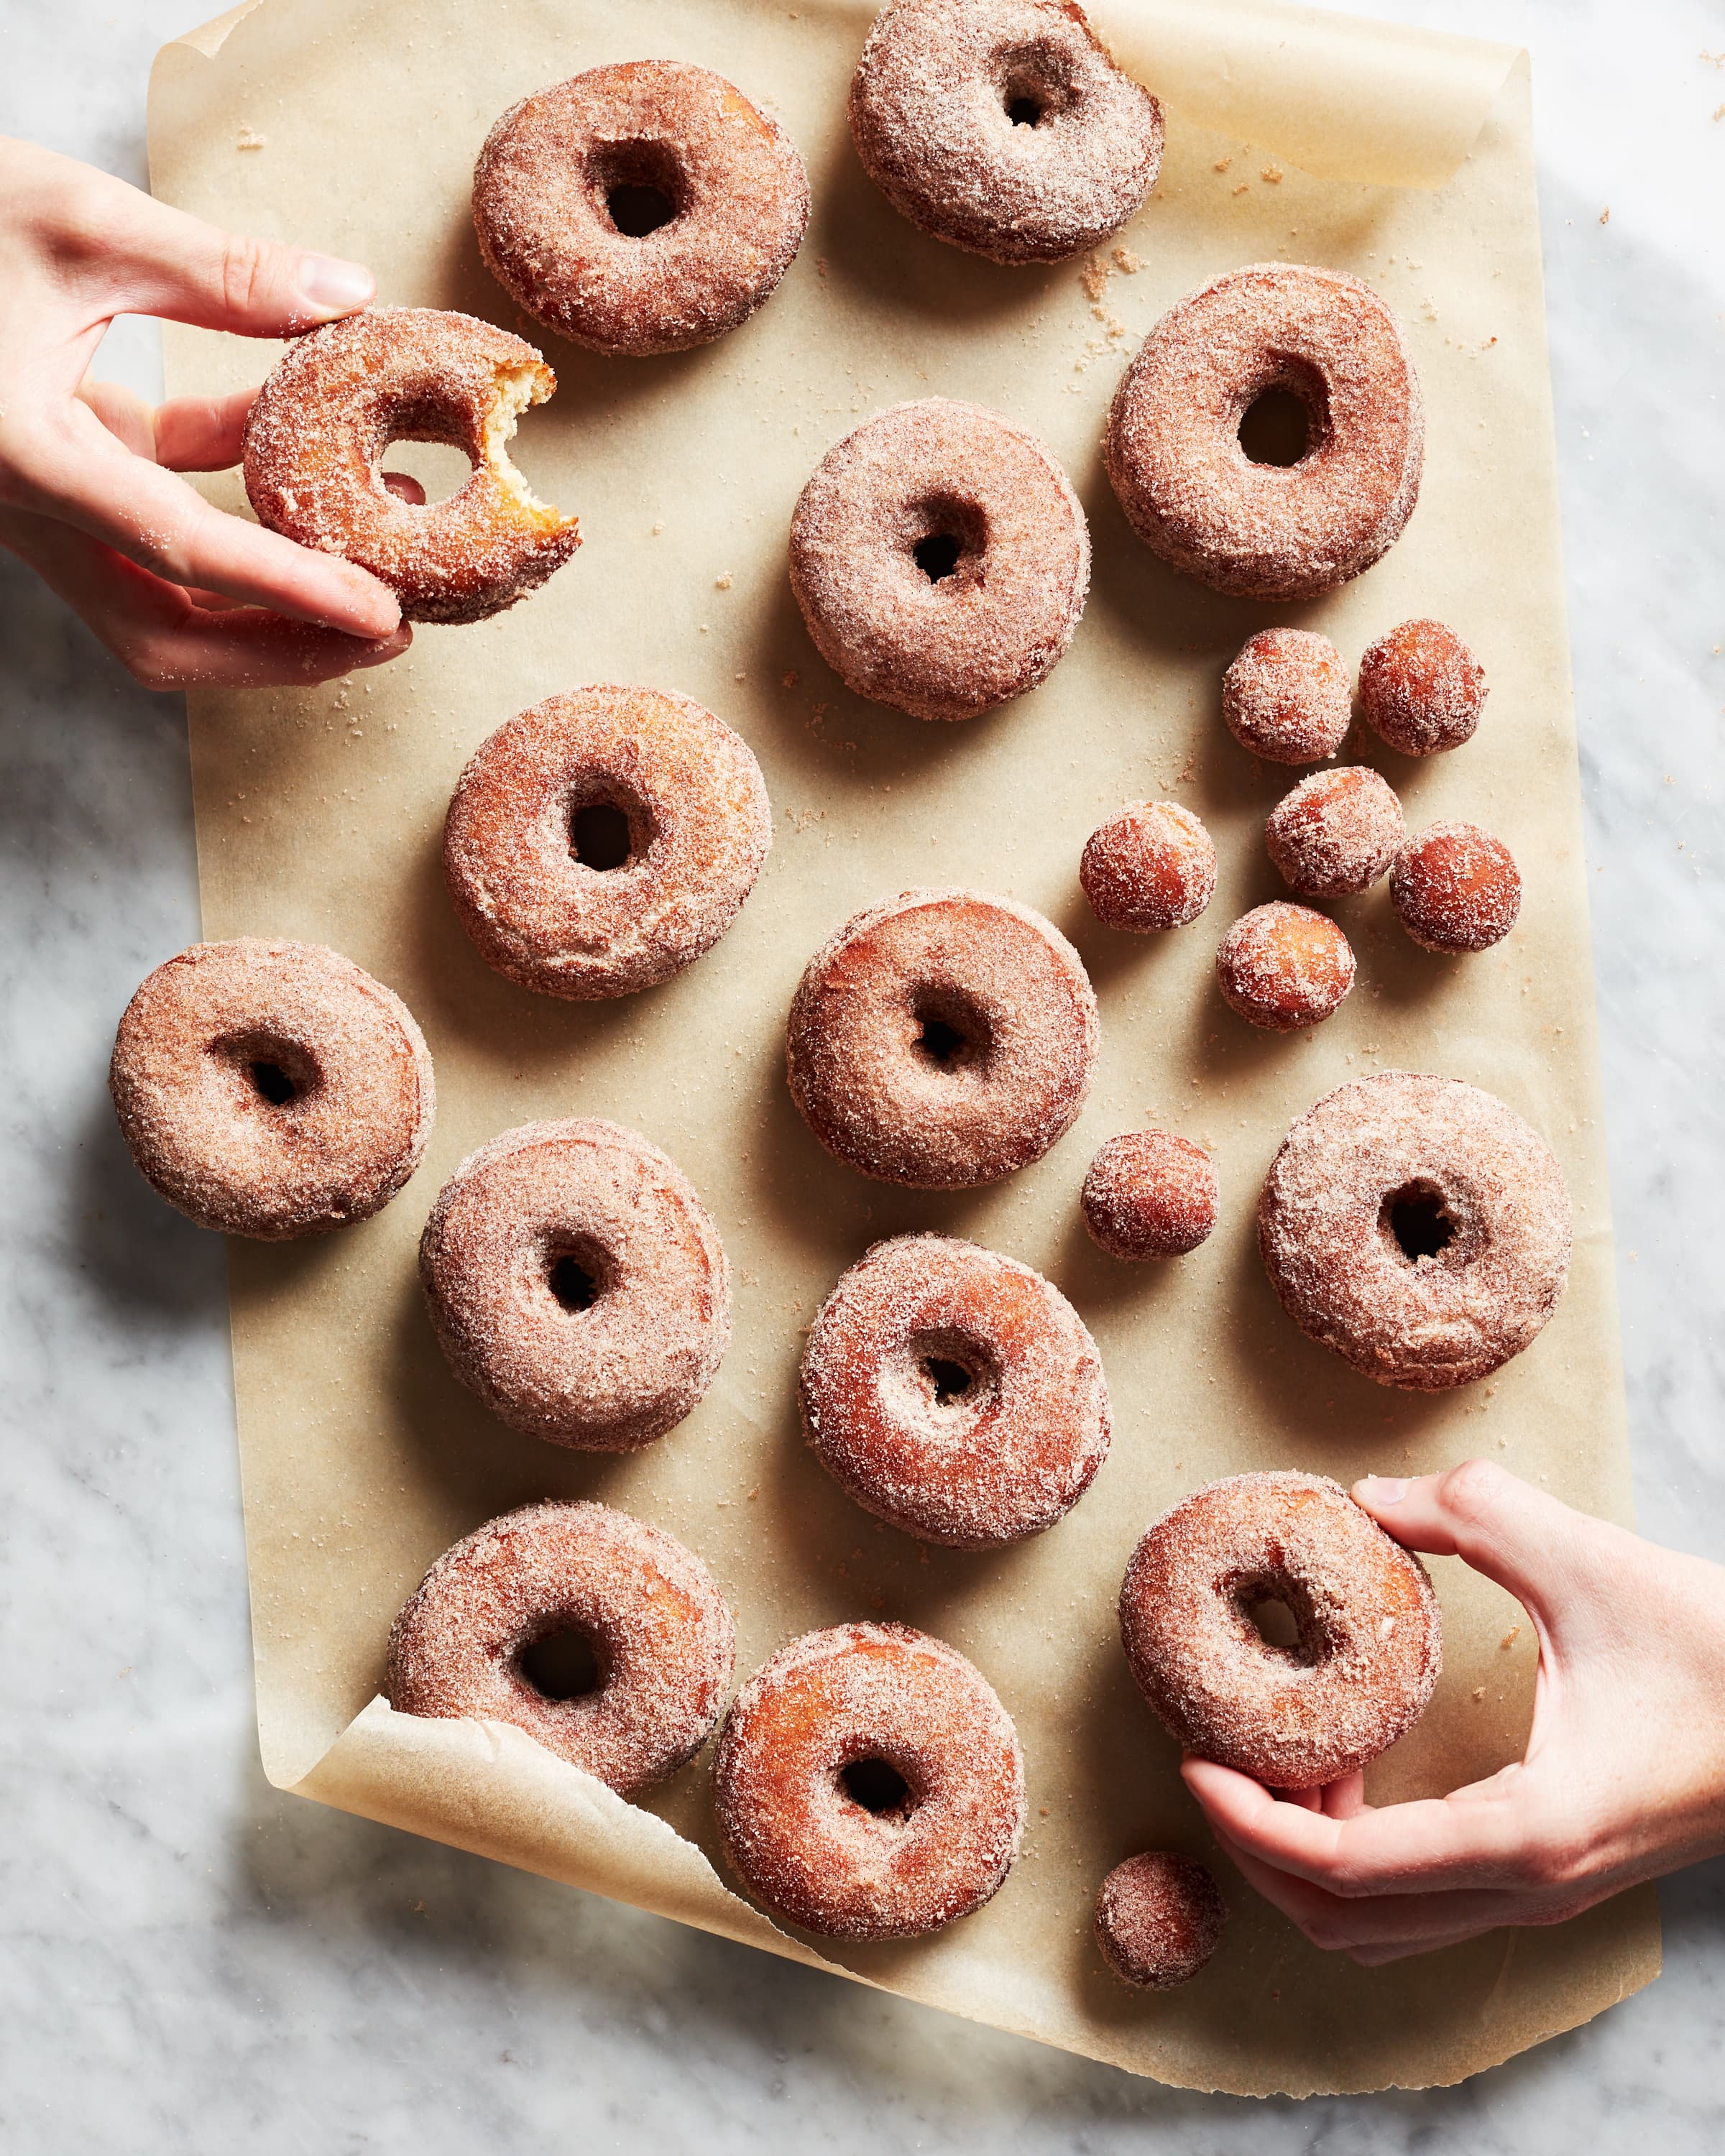 How to Make the Best Apple Cider Doughnuts at Home | The Kitchn